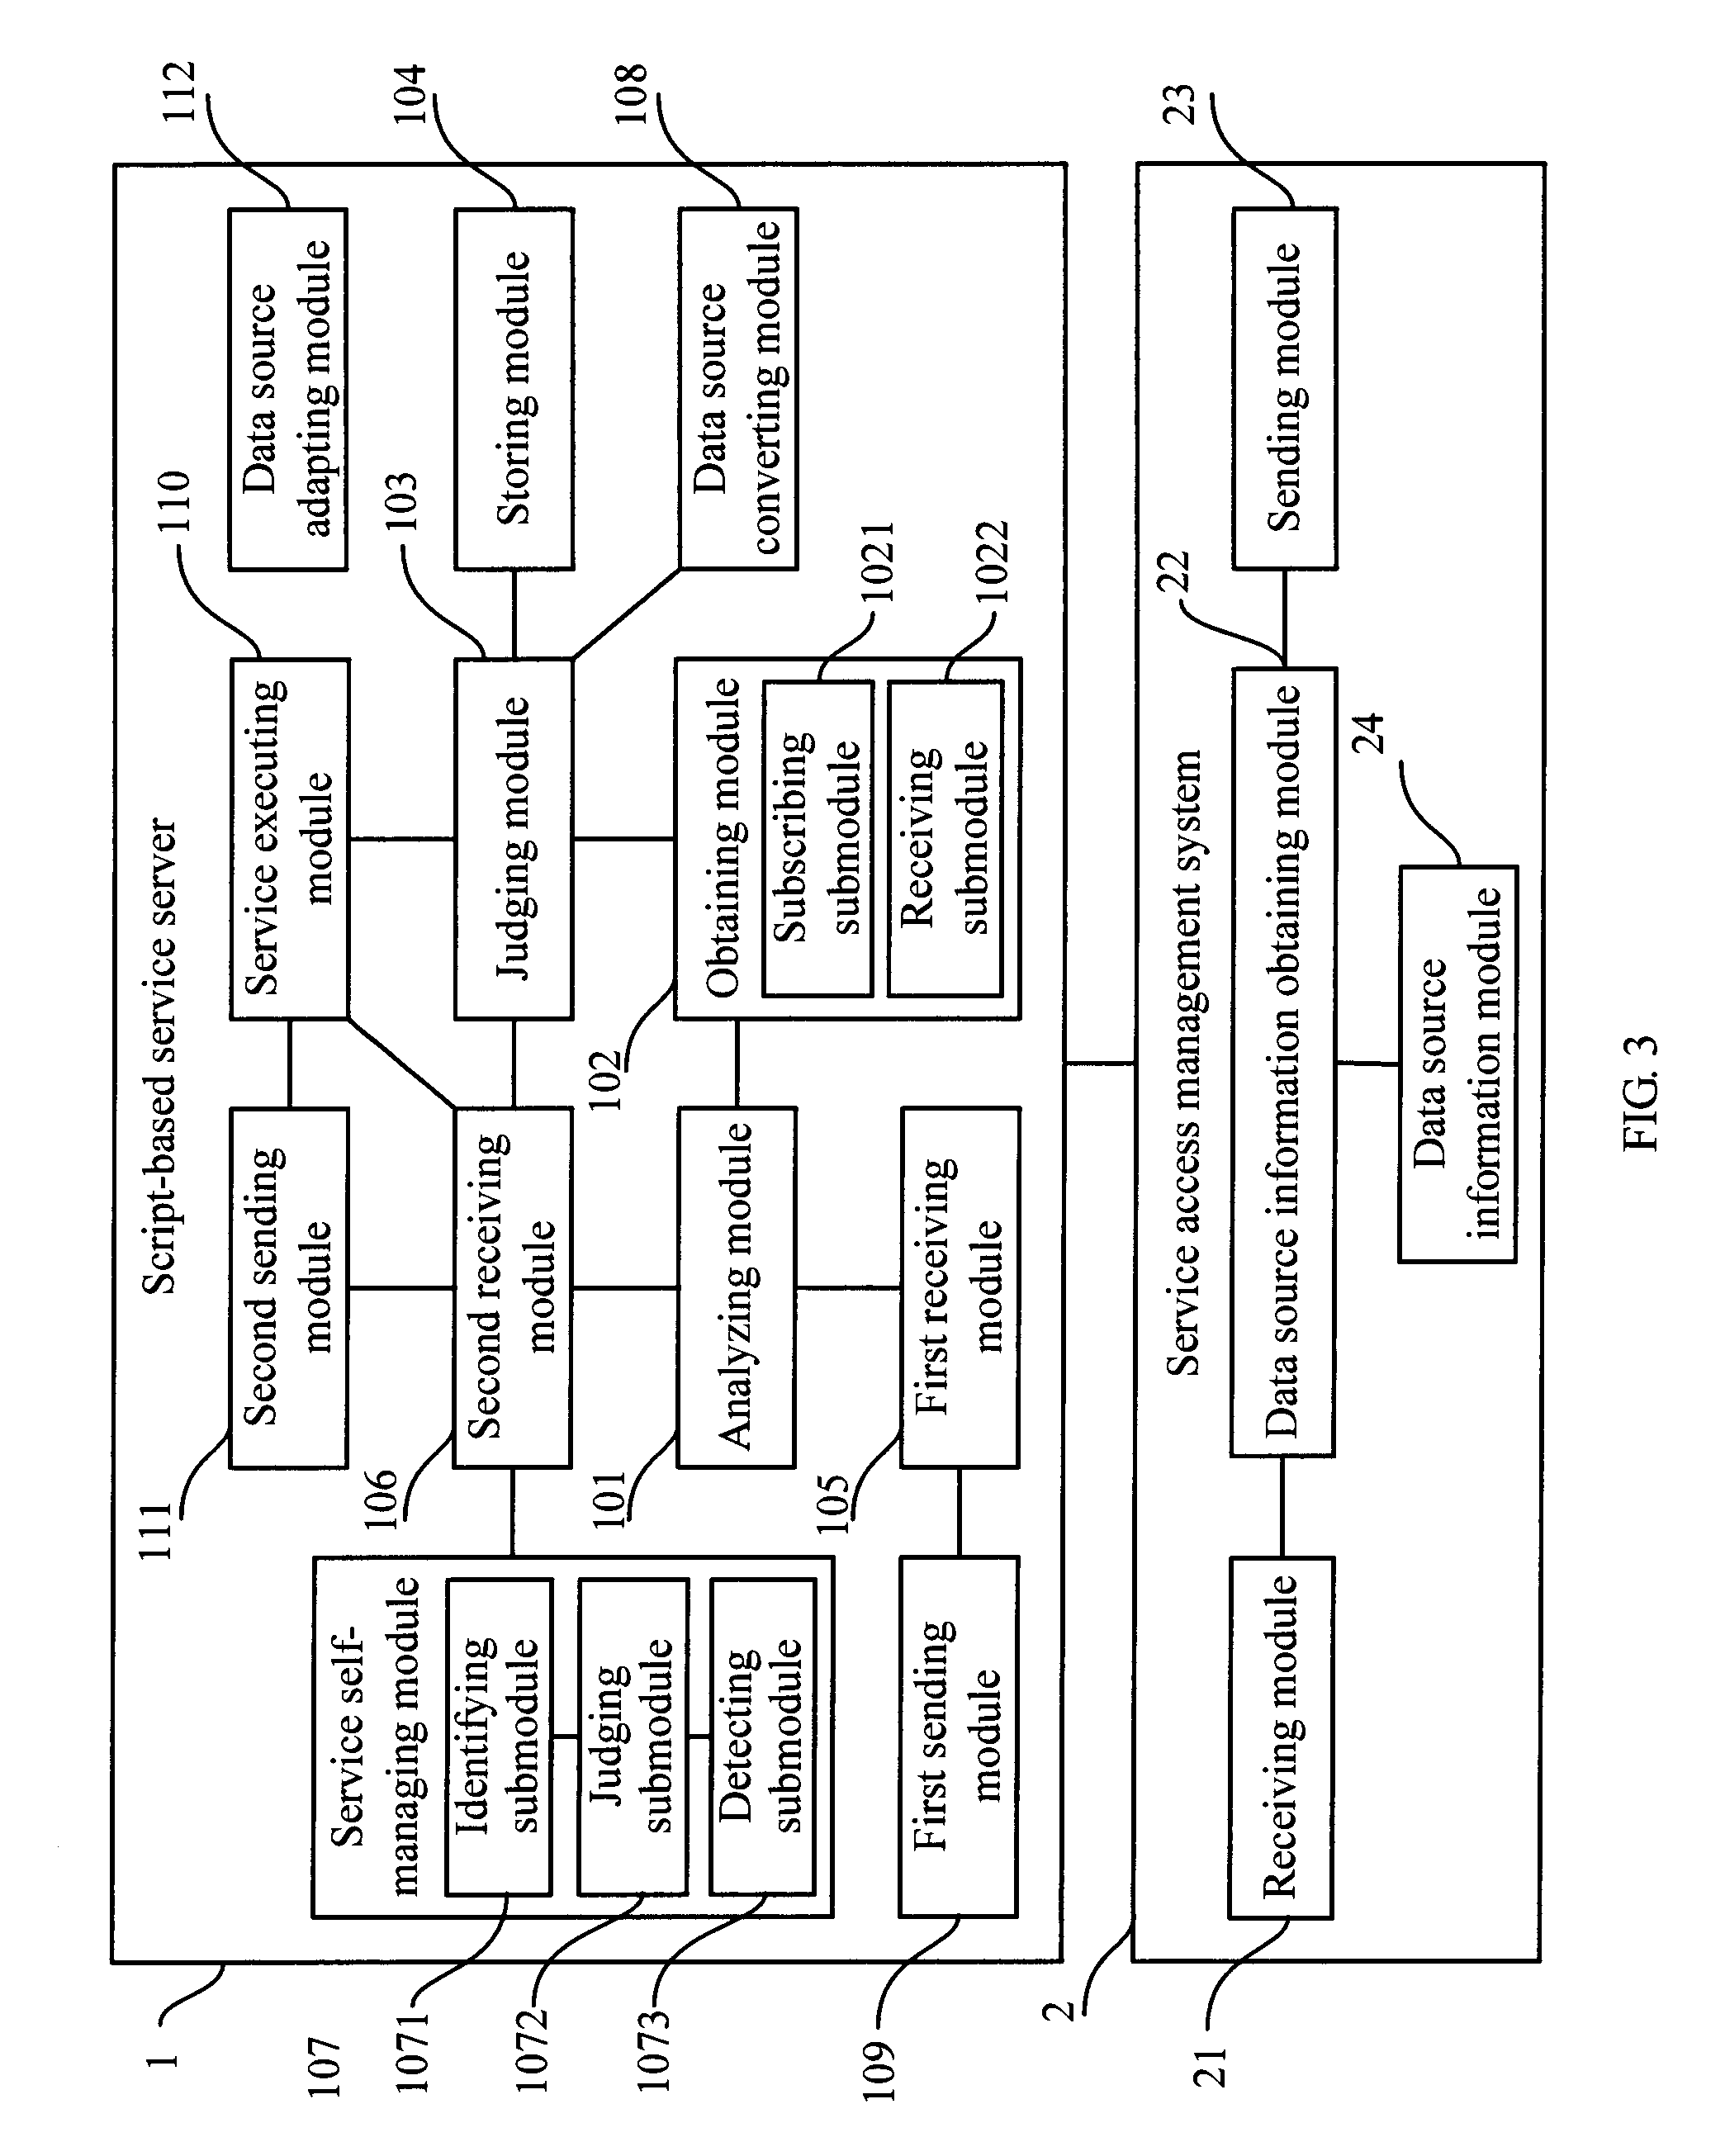 Method, apparatus, and system for enhancing application reliability of a script-based service